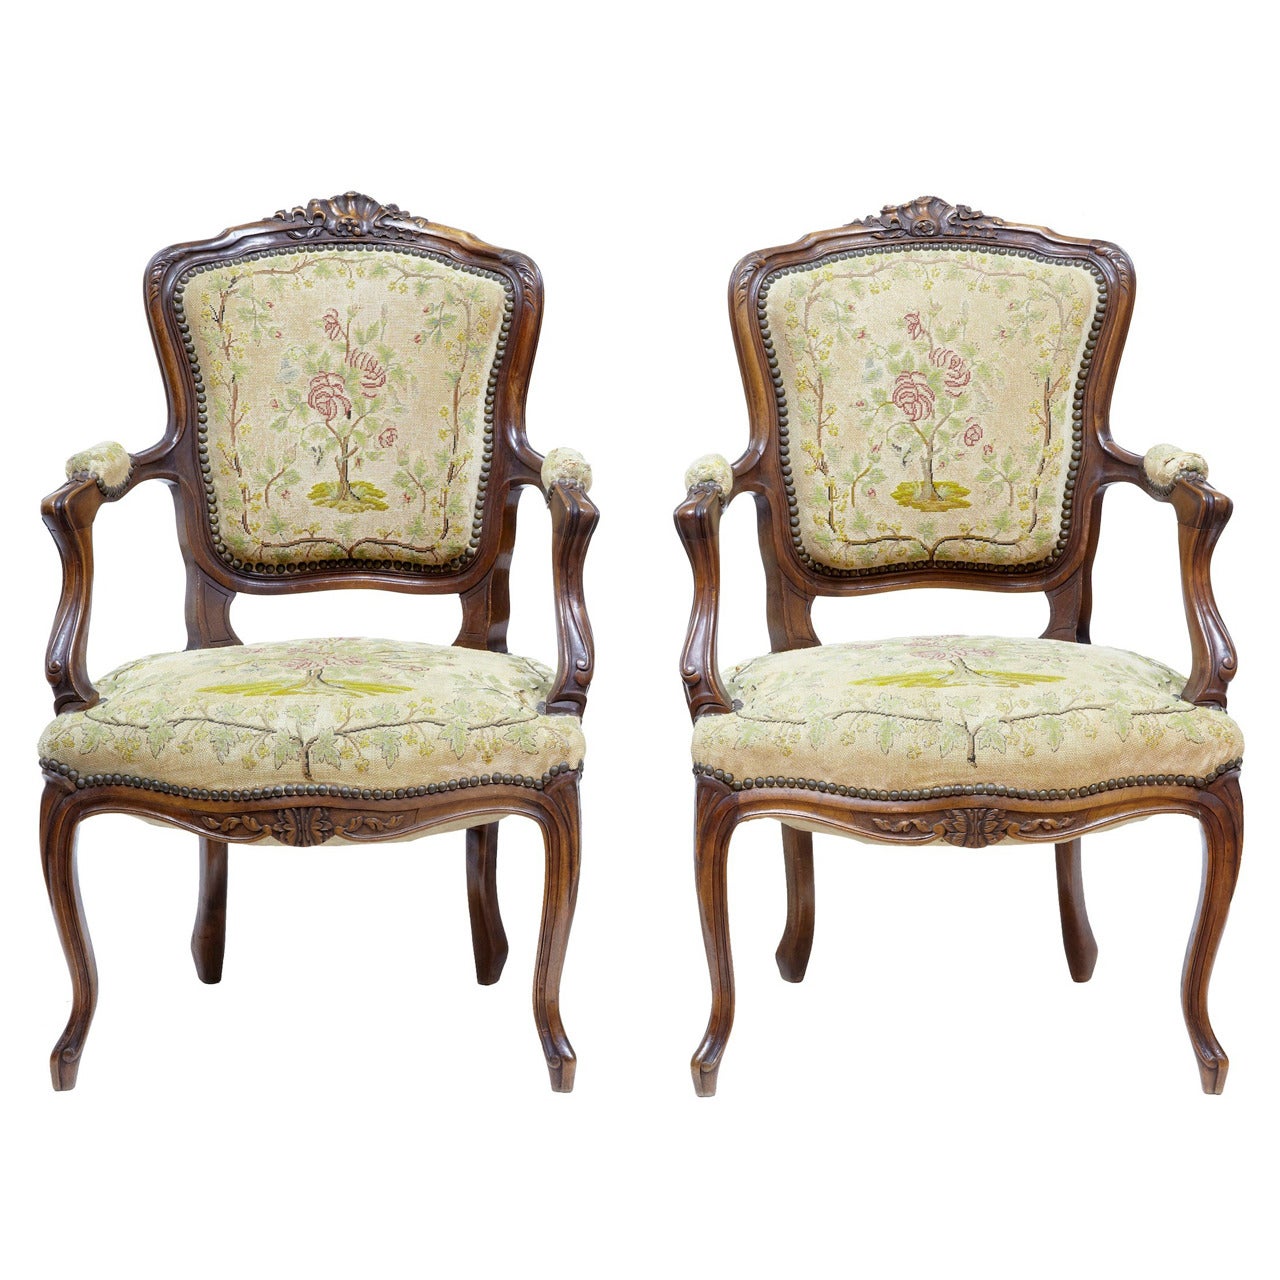 Pair of 19th Century French Fauteuil Walnut Armchairs